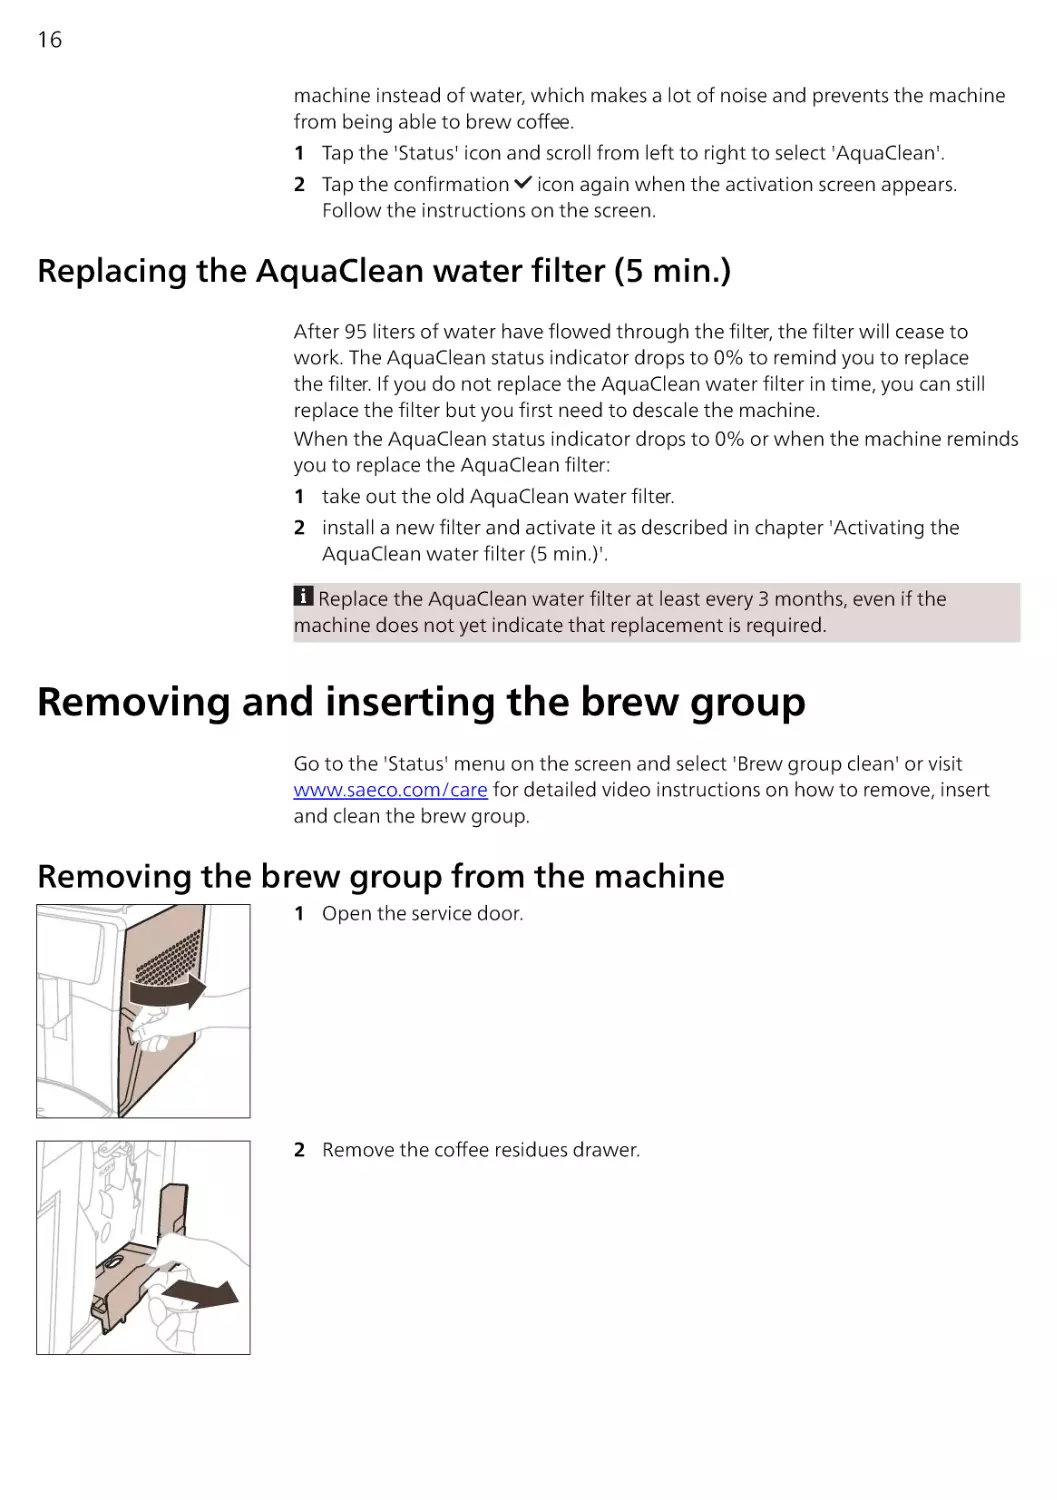 Replacing the AquaClean water filter (5 min.)
Removing and inserting the brew group
Removing the brew group from the machine